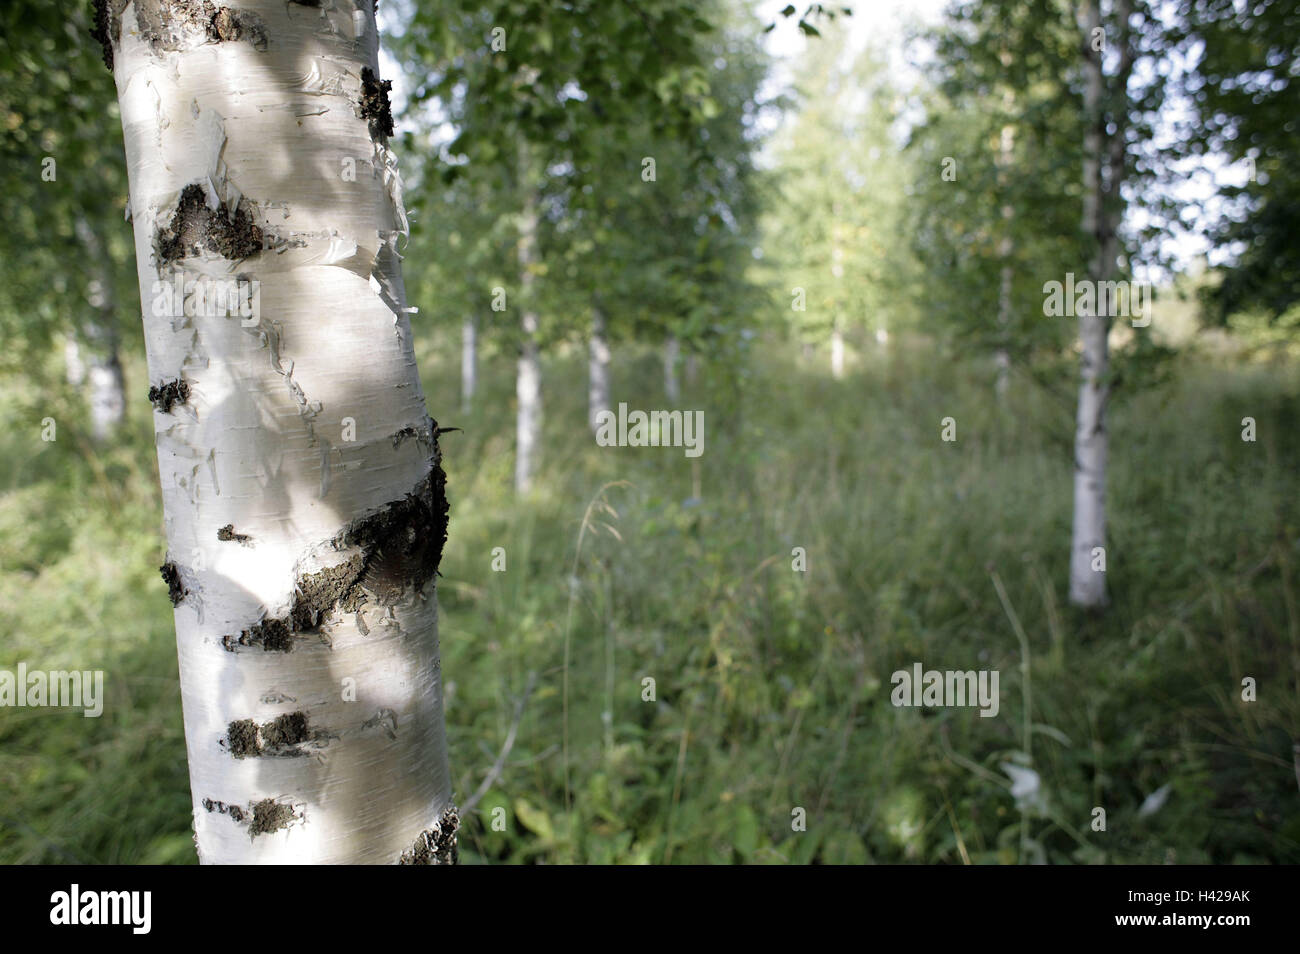 Sweden, Norrland, Norrbotten, birch forest, detail, Scandinavia, polar circle, scenery, nature, wood, plants, grass, trees, birches, trunks, green, strains, untouched, deserted, broad-leaved trees, Stock Photo